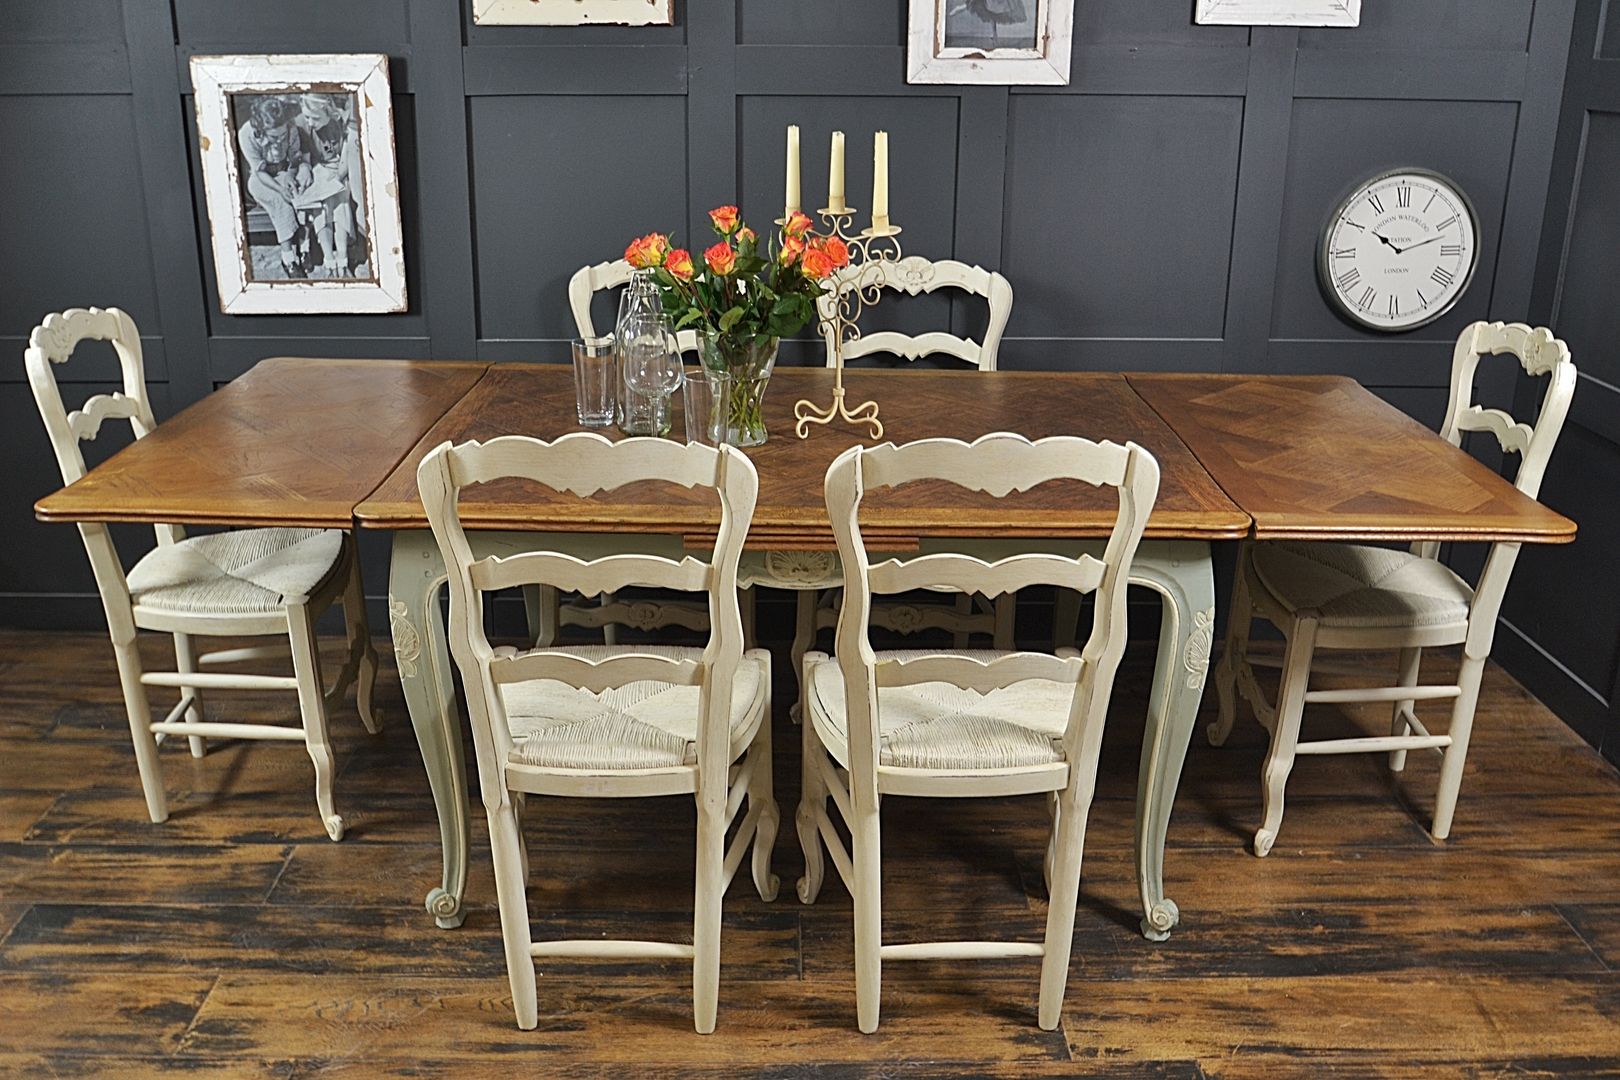 Shabby Chic French Oak Dining Table with 6 Chairs in Rococo, The Treasure Trove Shabby Chic & Vintage Furniture The Treasure Trove Shabby Chic & Vintage Furniture Salas de jantar clássicas Mesas